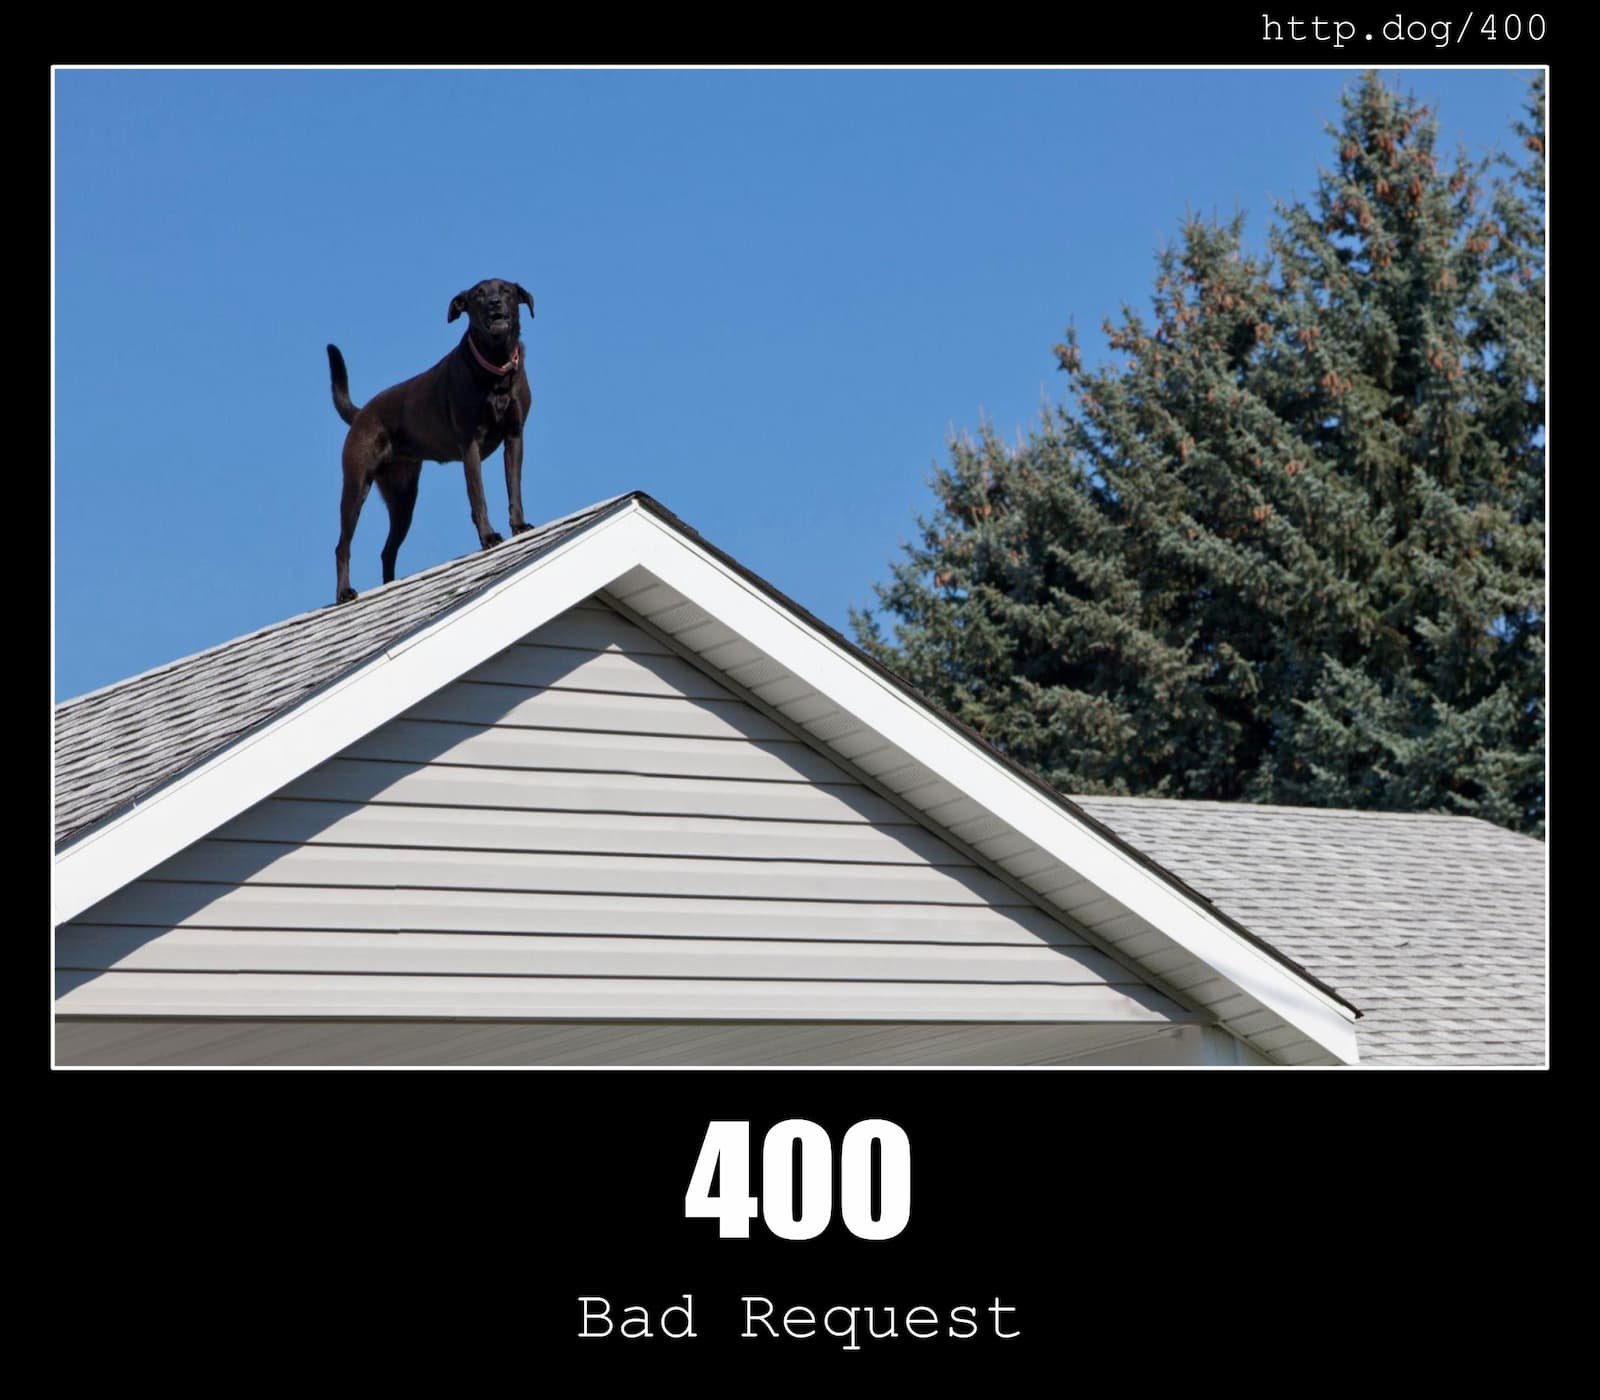 HTTP Status Code 400 Bad Request & Dogs